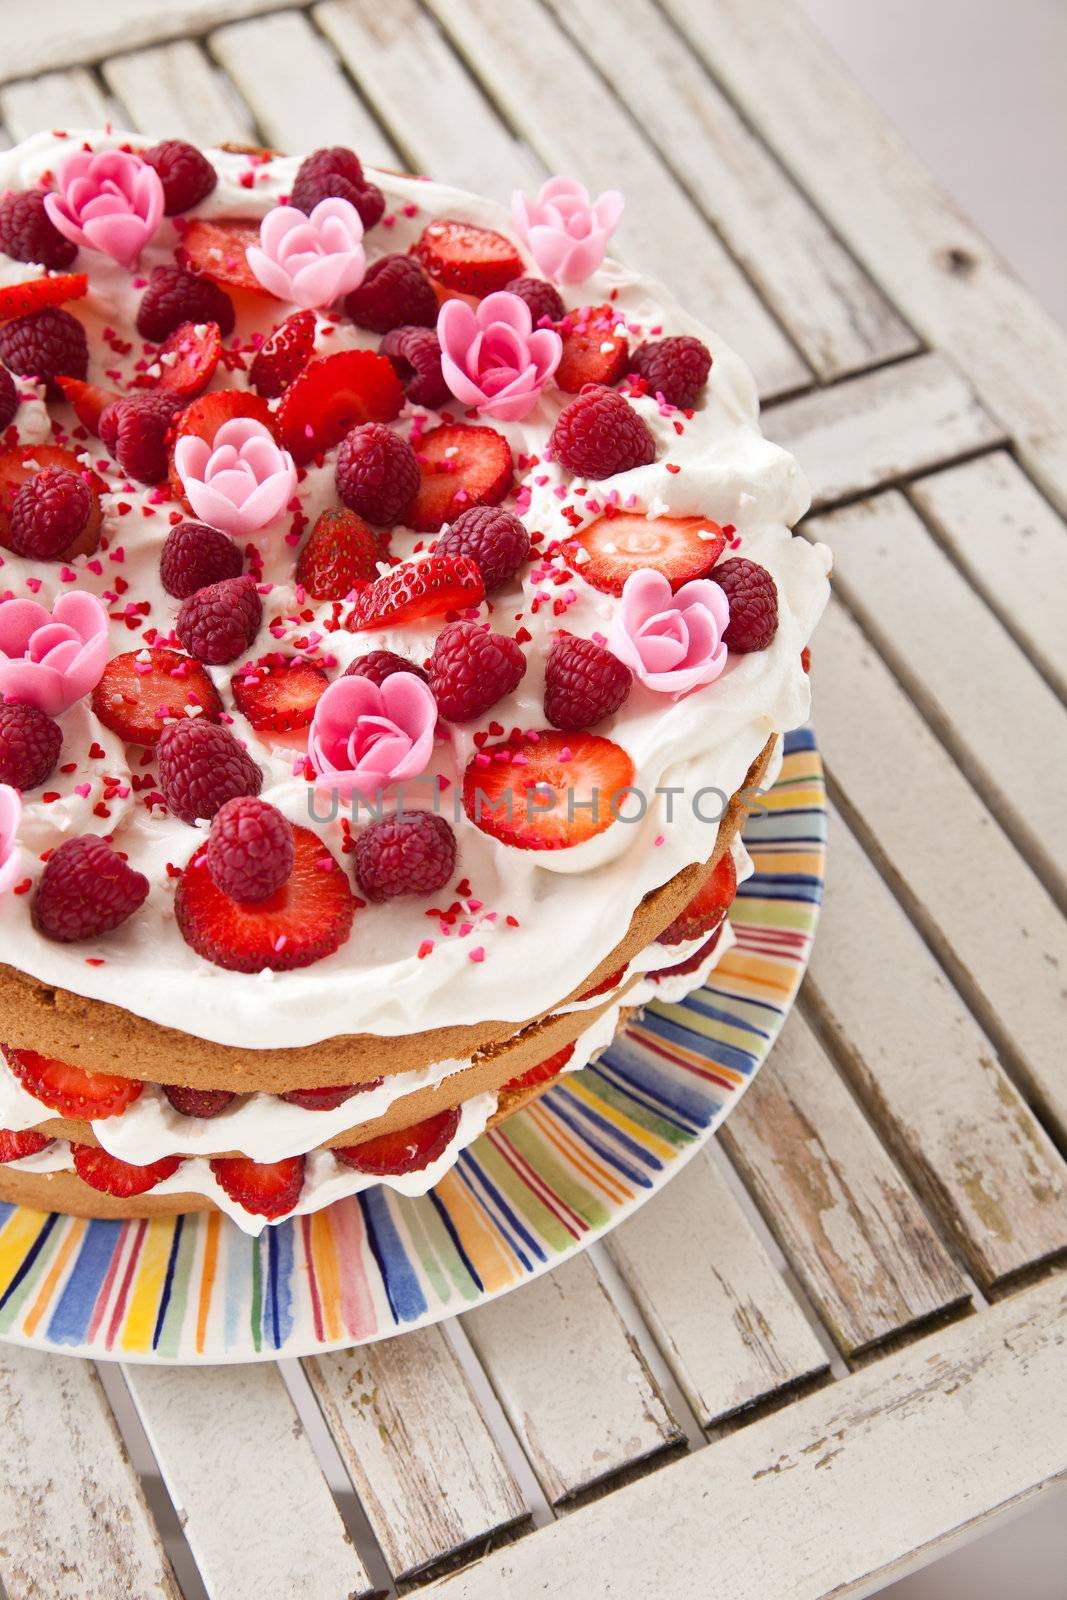 Delicious looking layered cake decorated with fruit, whipped cream and marizapan flowers